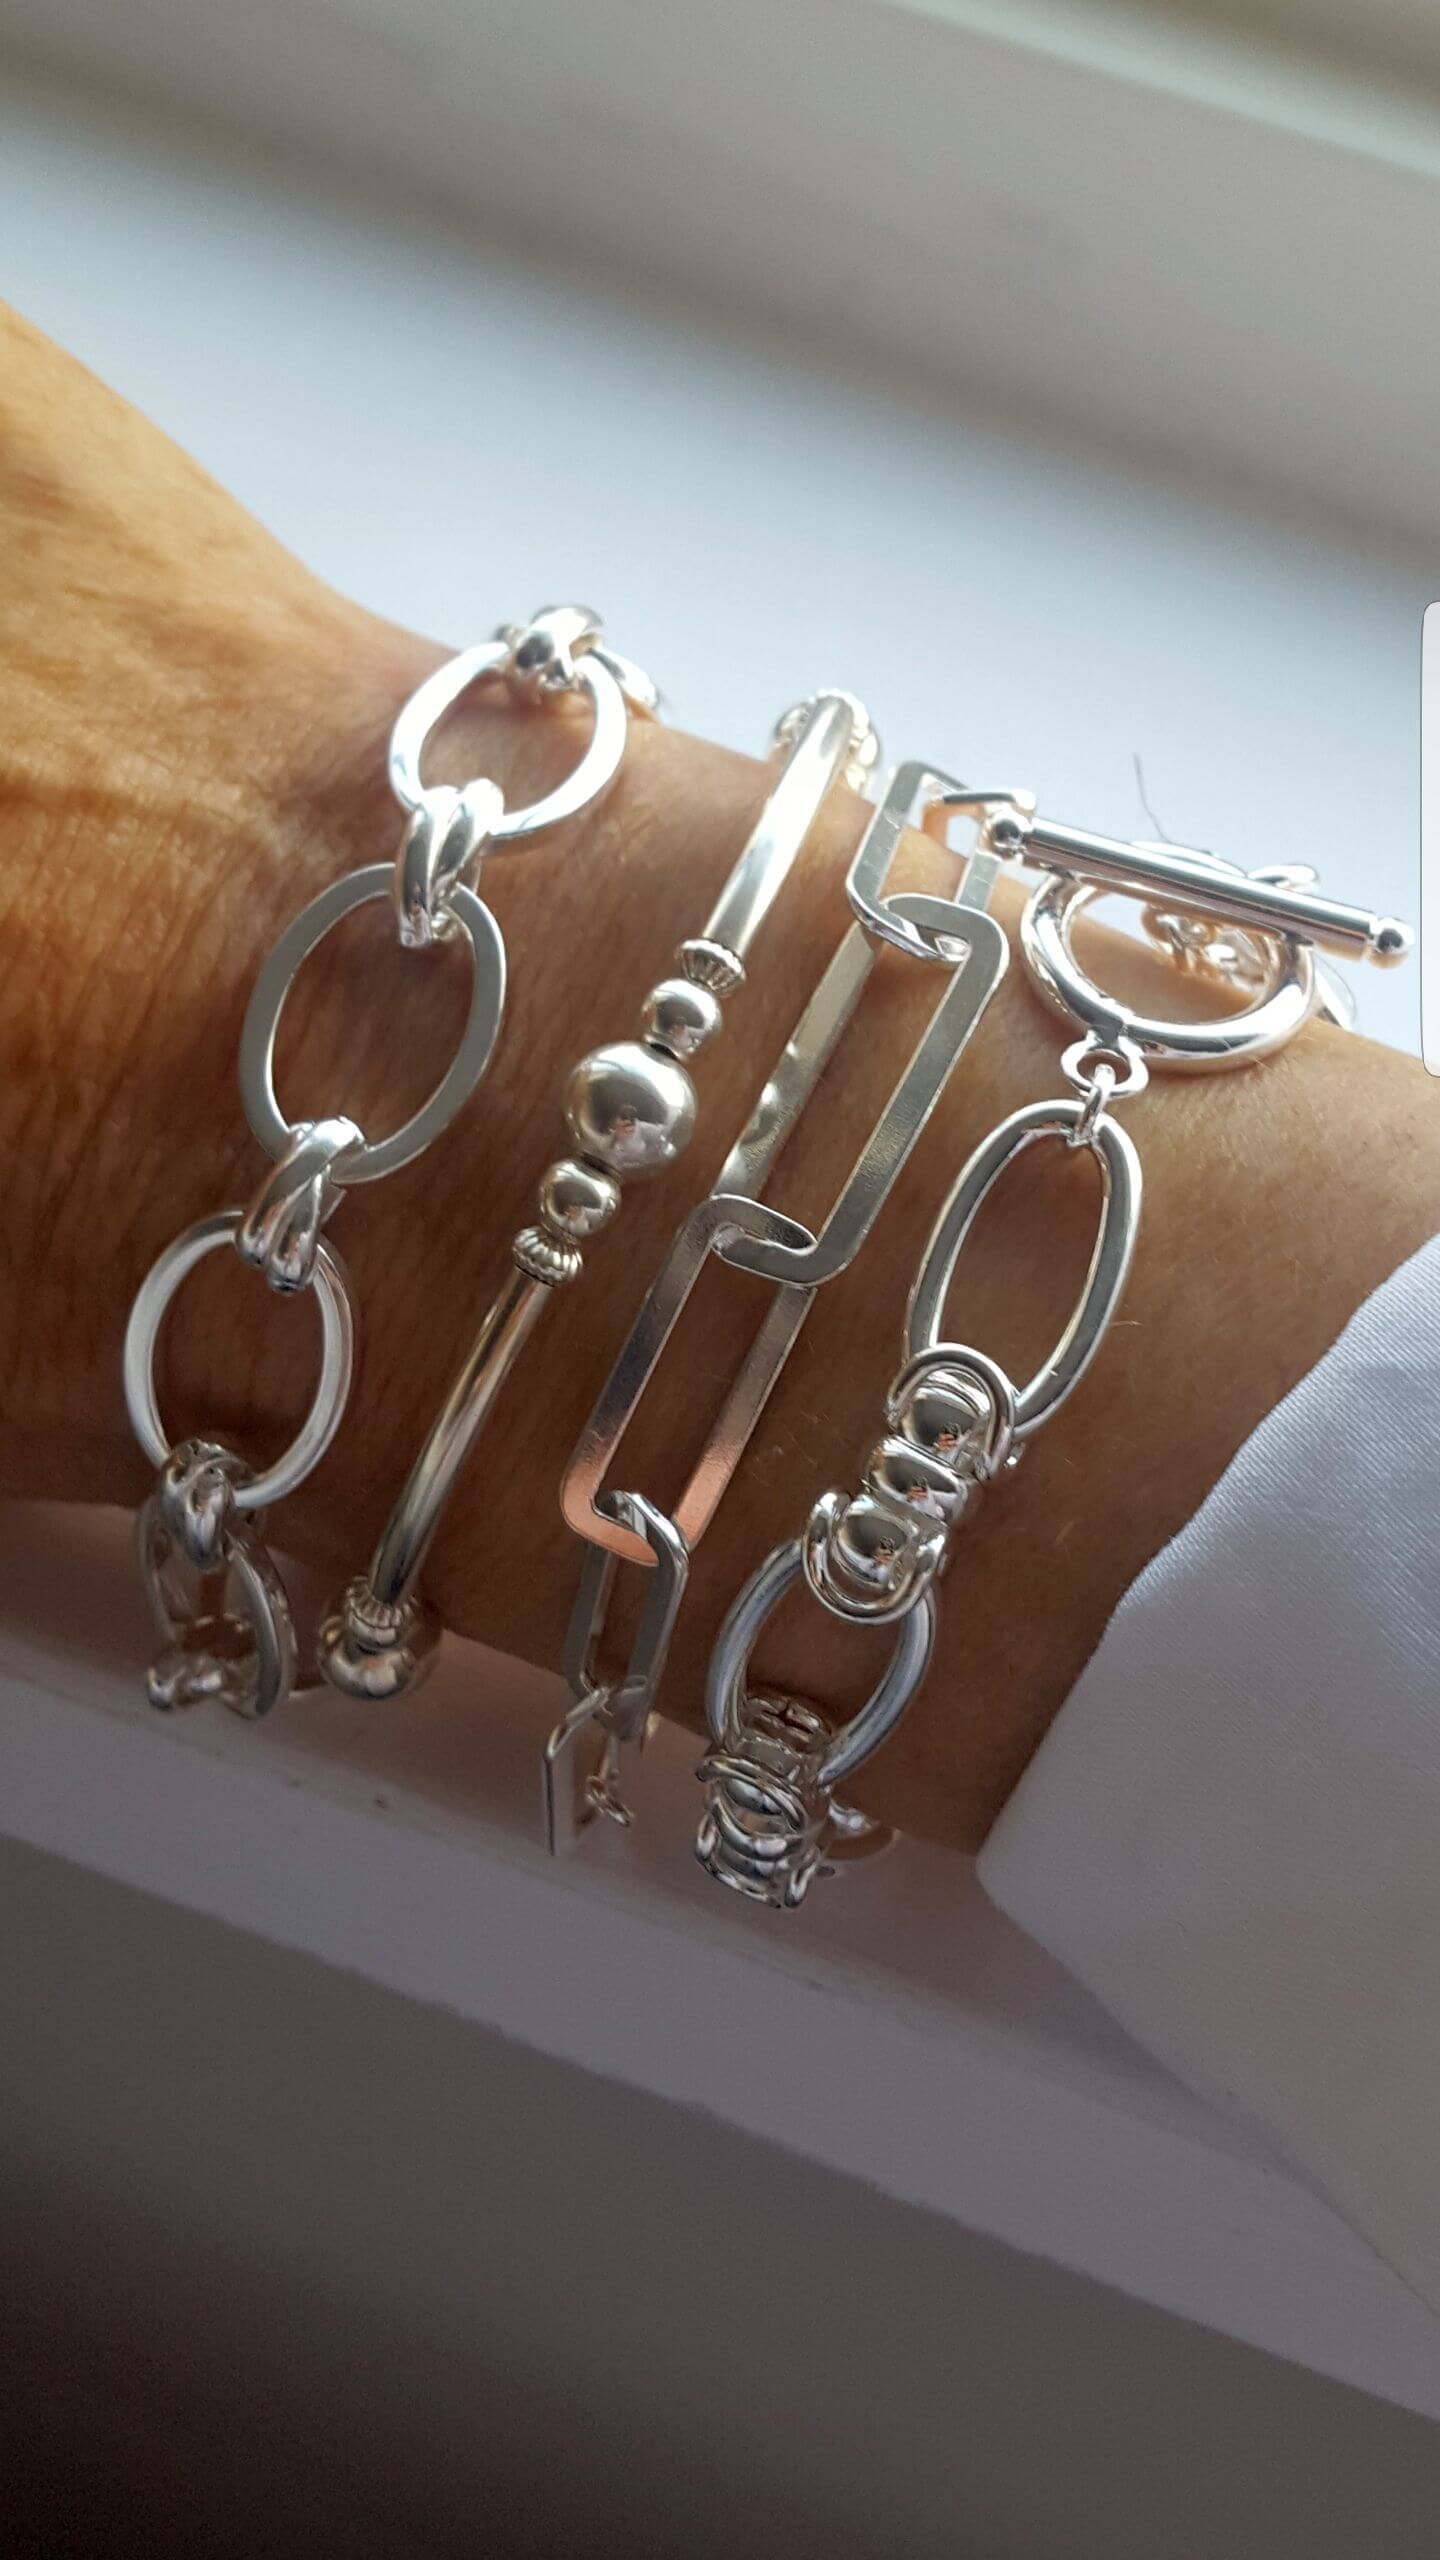 Pandroa 925 Sterling Silver Chunky Infinity Knot Chain Bracelet With Charms  Silver Womens Gift Jewelry With Original Box From Yummy_shop, $12.42 |  DHgate.Com